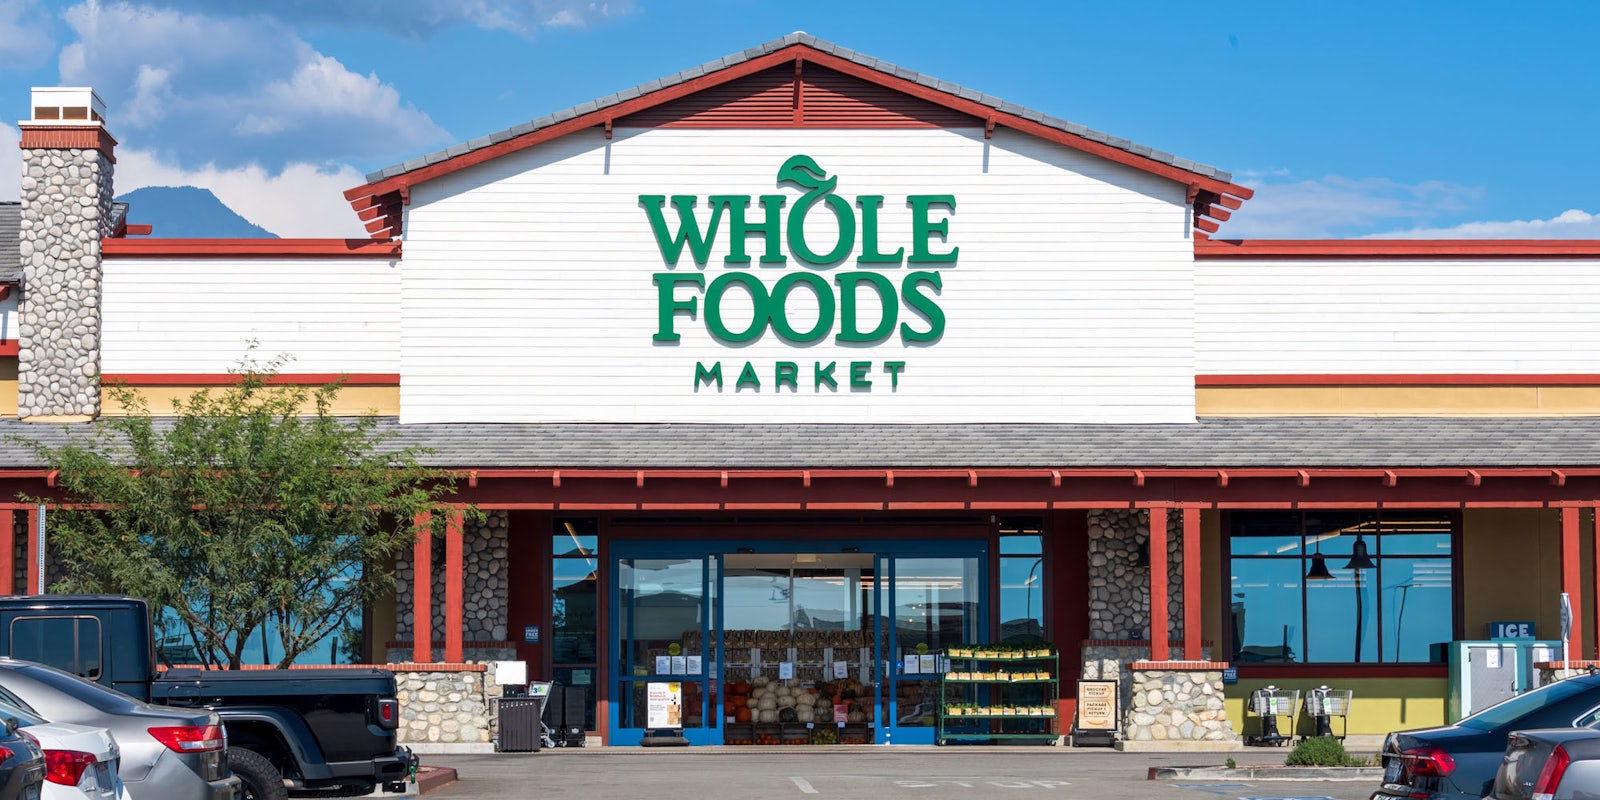 Whole Foods Market building with sign and parking lot